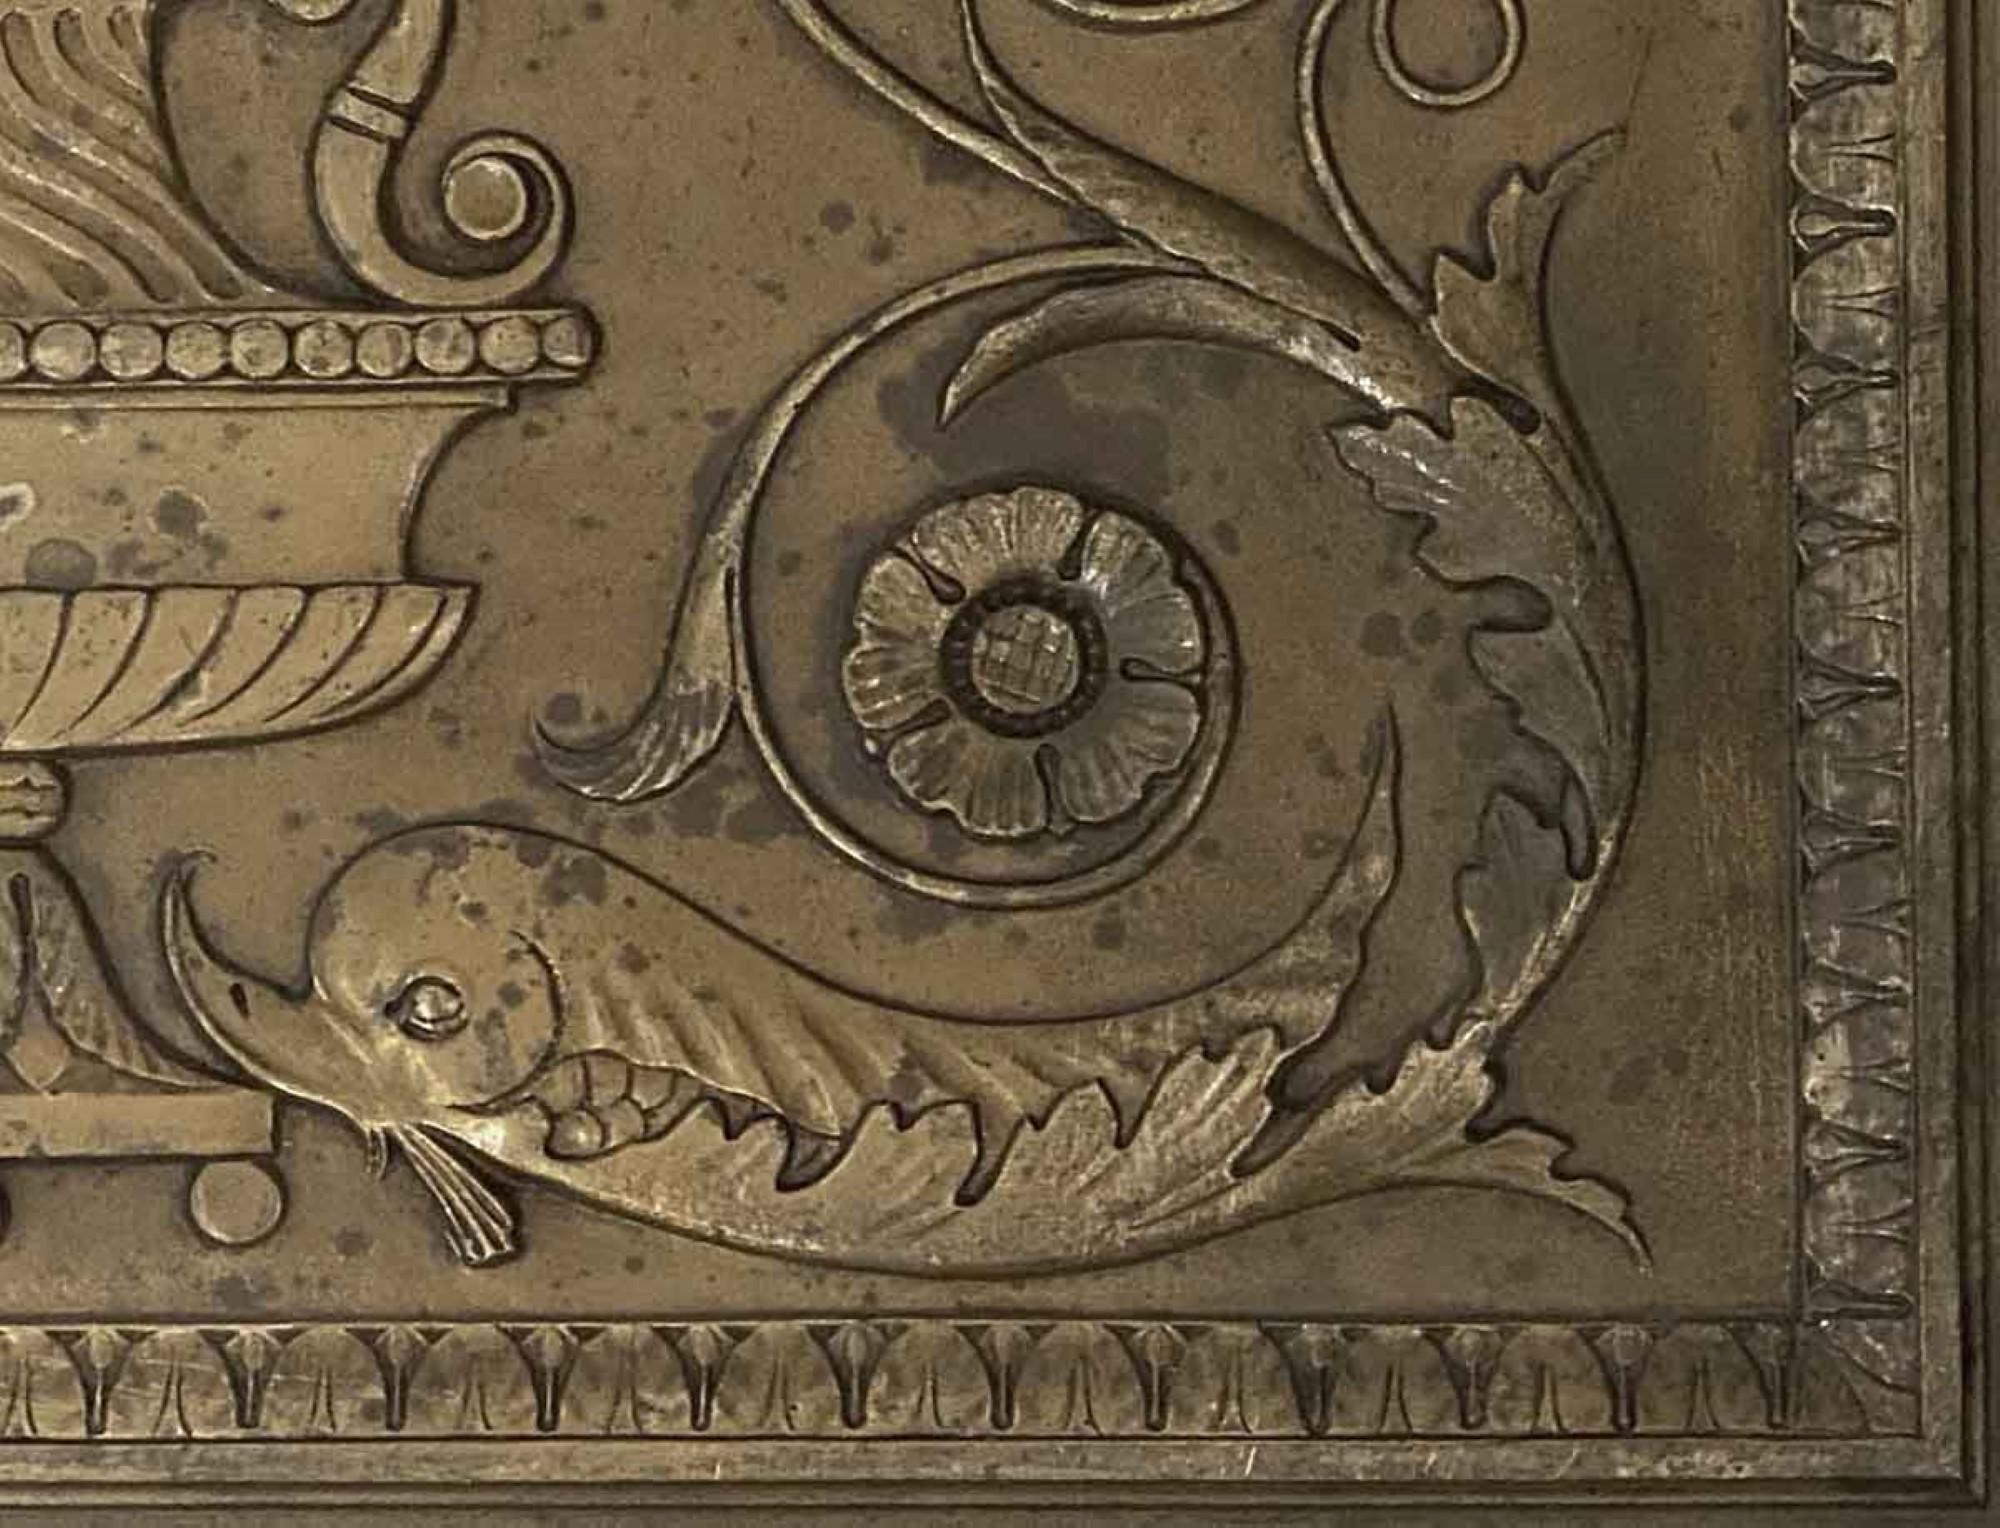 These Beaux-Arts bronze panels feature dolphins, flowers, foliage, birds and a large urn overflowing with fruit. From the 1904 St. Regis Hotel in NYC and were removed during renovations in the 1990s. With original patina. Priced each. This can be